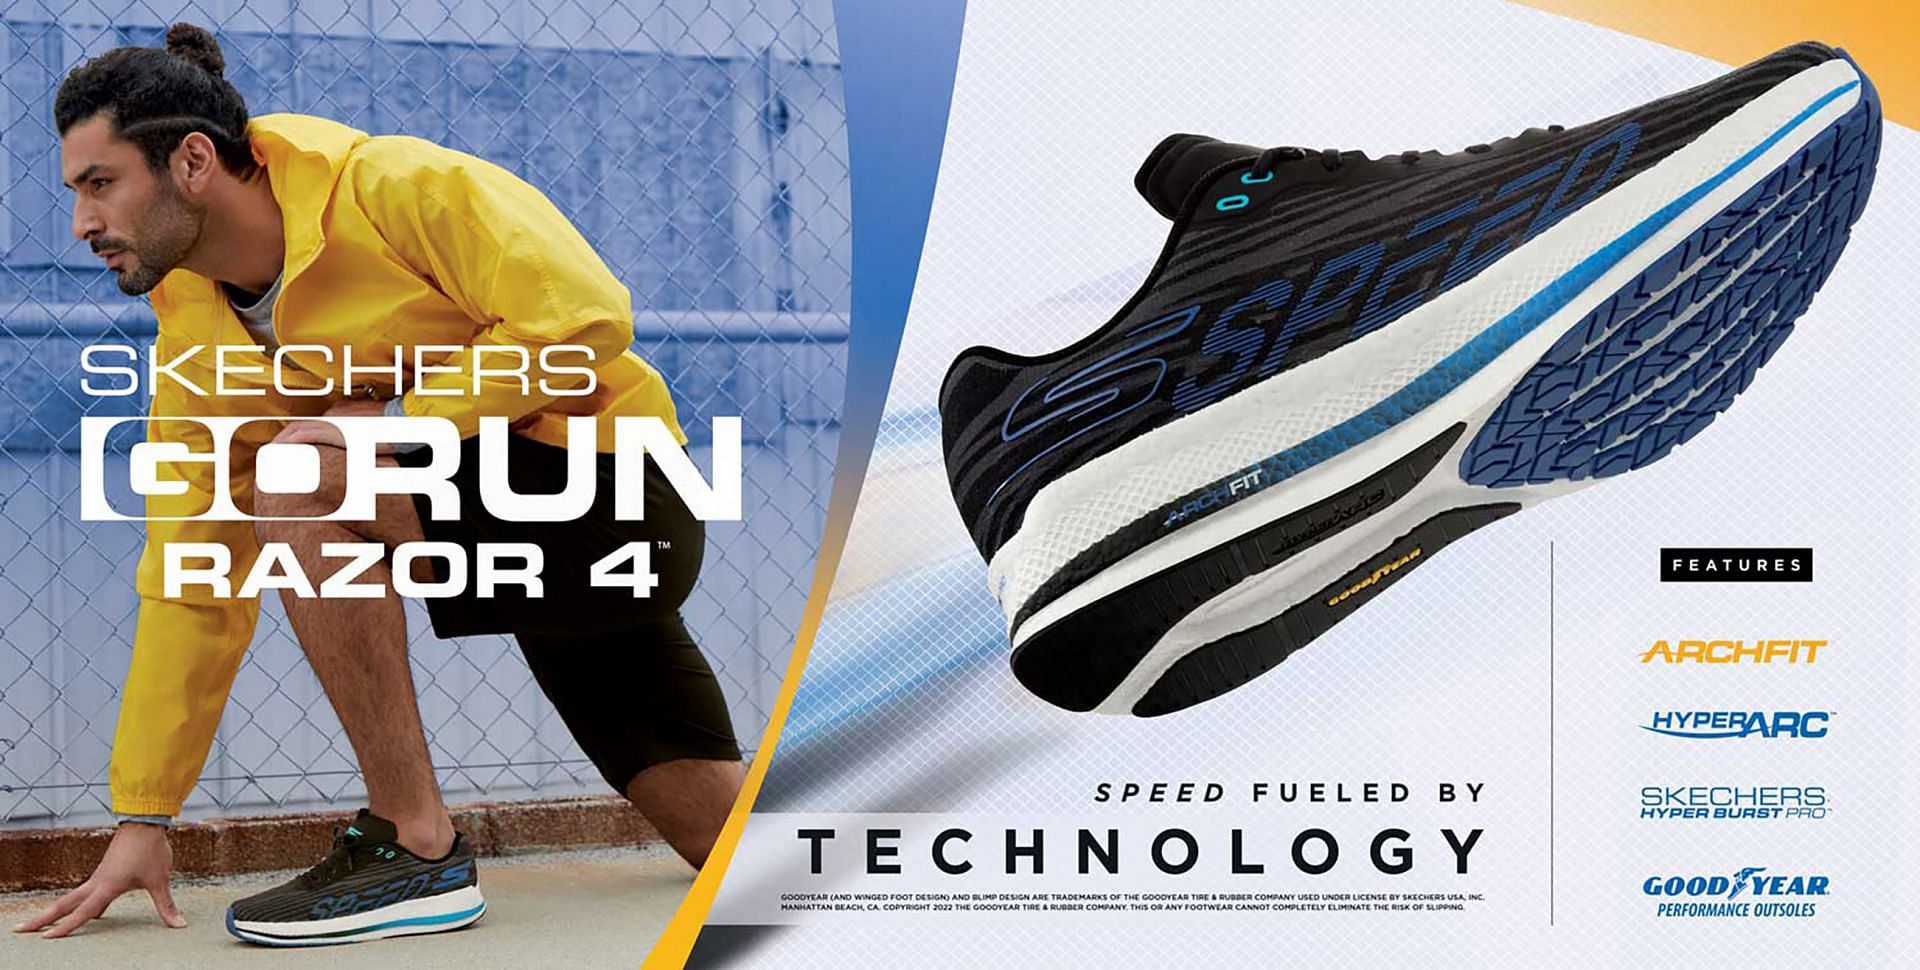 5 features that make Skechers GO RUN Razor 4 the ultimate shoe for  professional runners